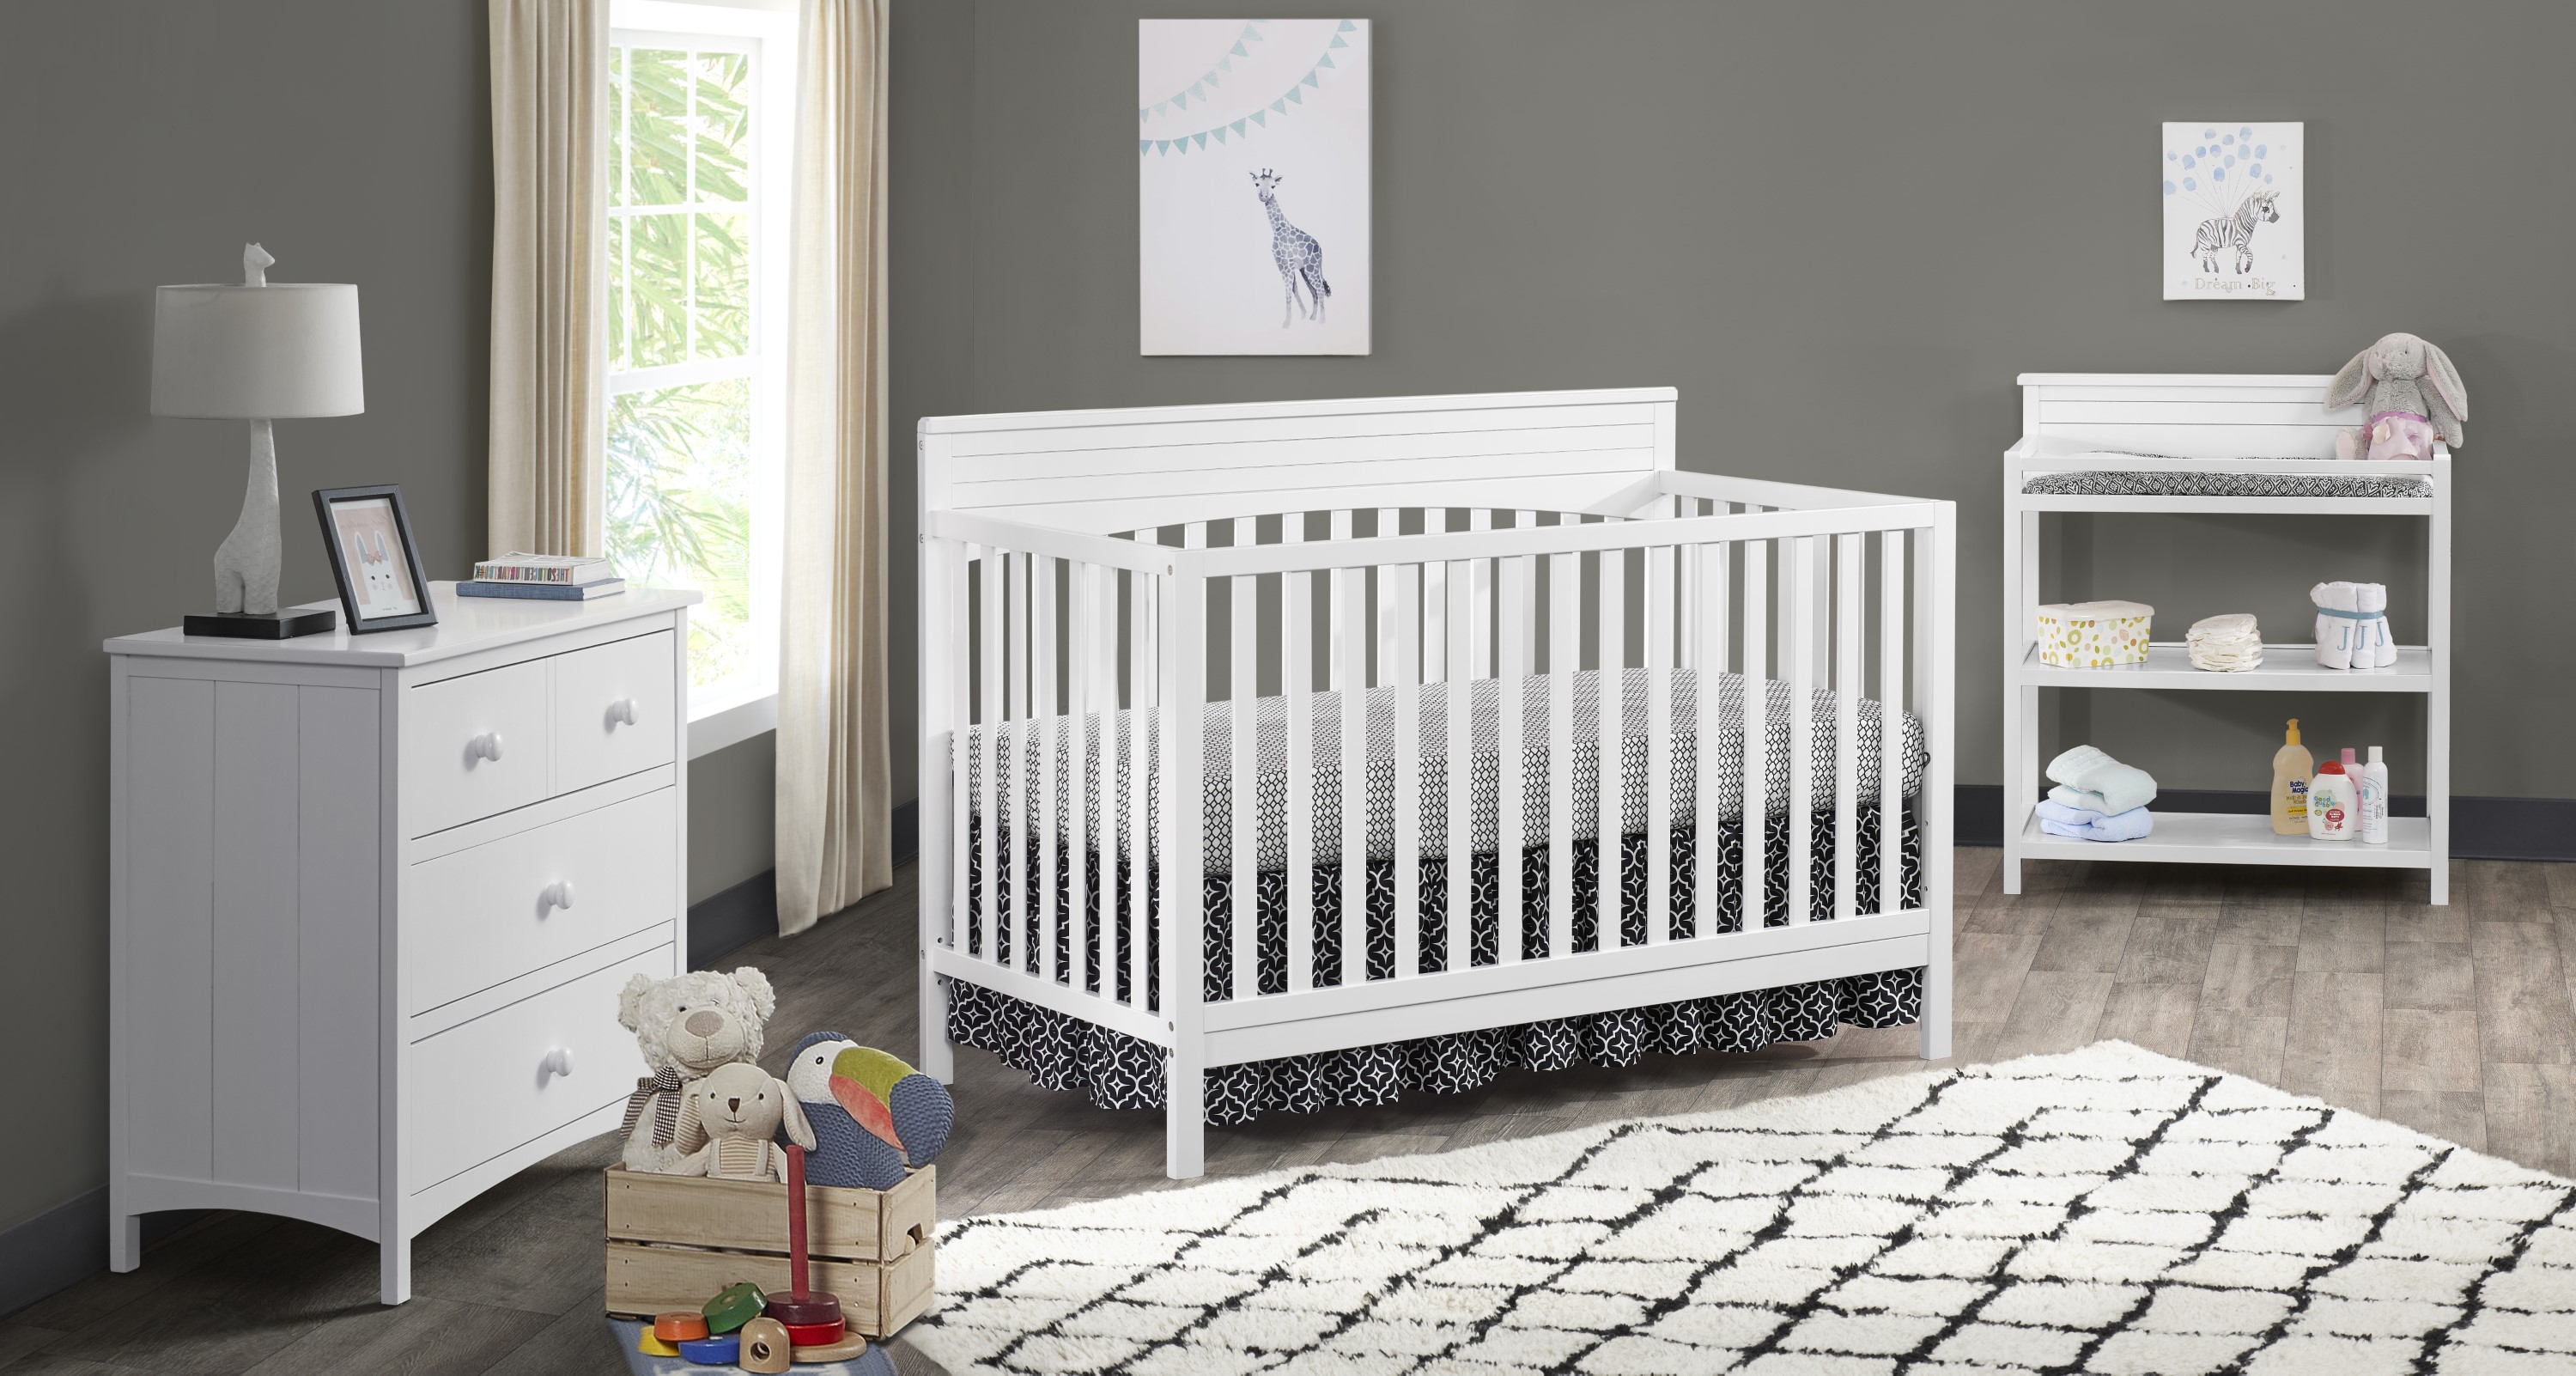 Oxford Baby Harper 4-in-1 Convertible Crib, Snow White, GREENGUARD Gold Certified, Wooden Crib - image 3 of 11